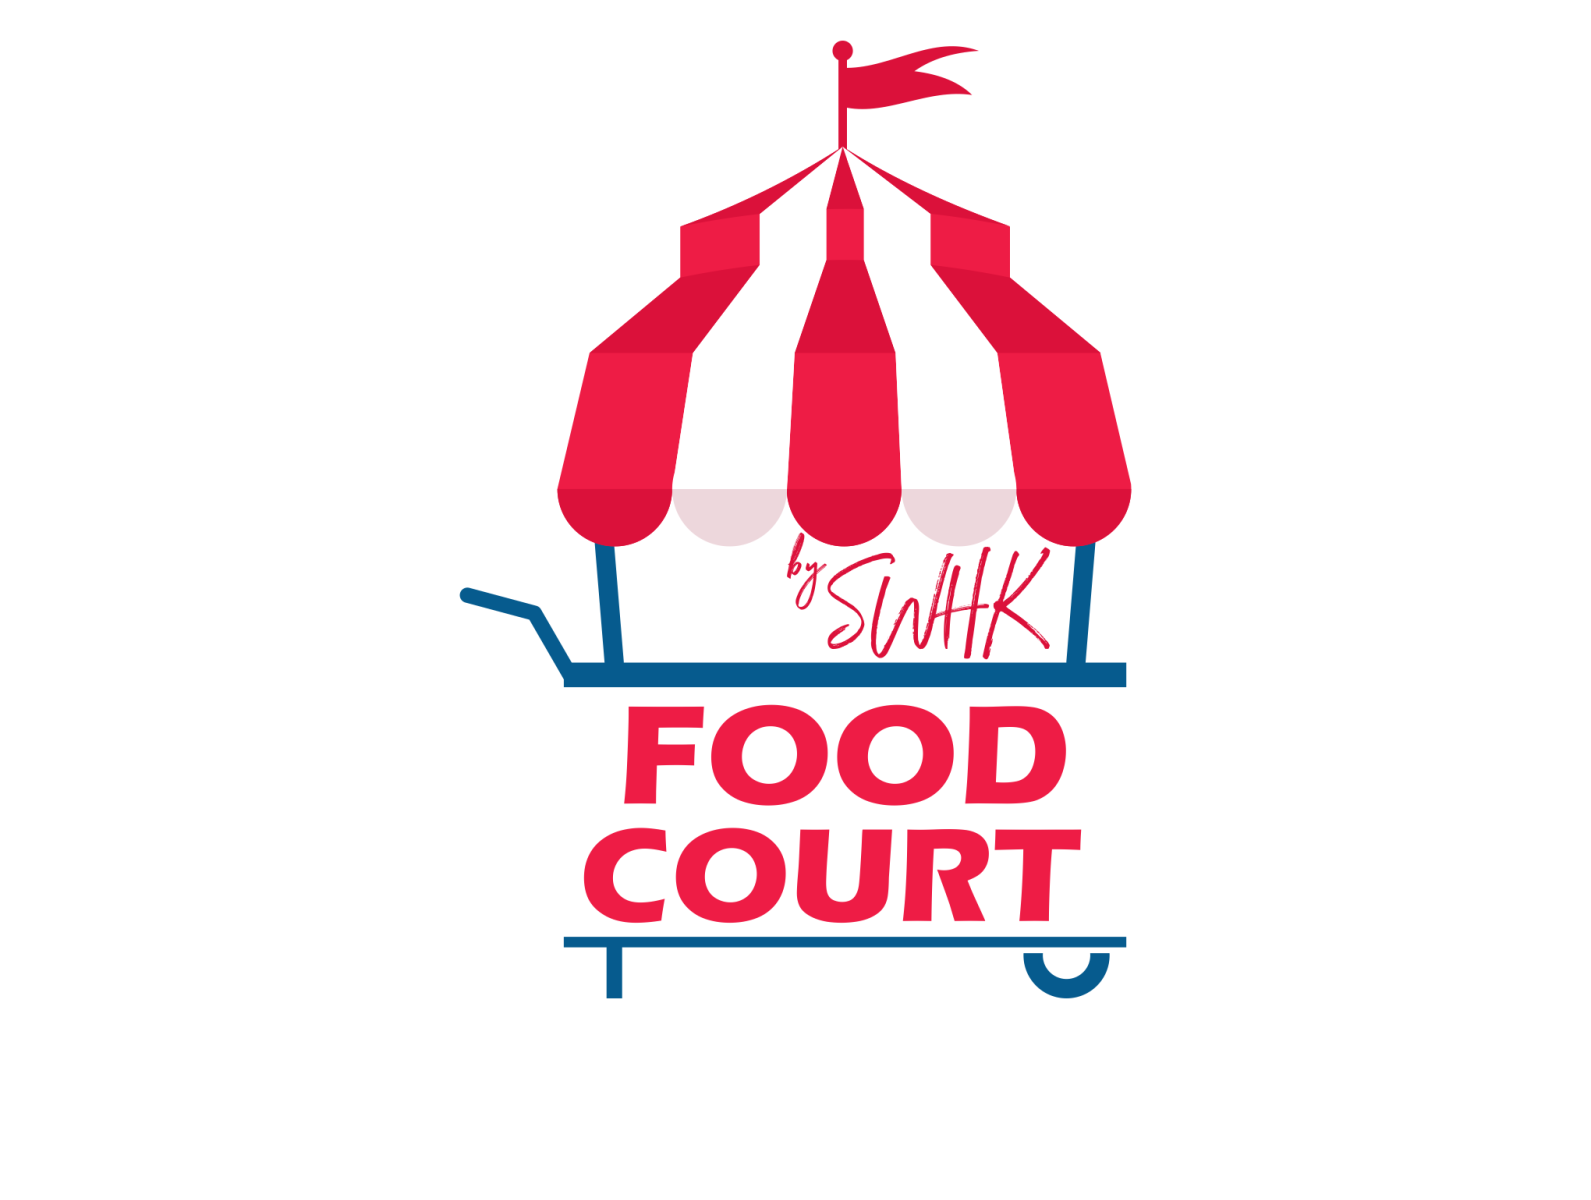 Food Court logo by ruang on Dribbble